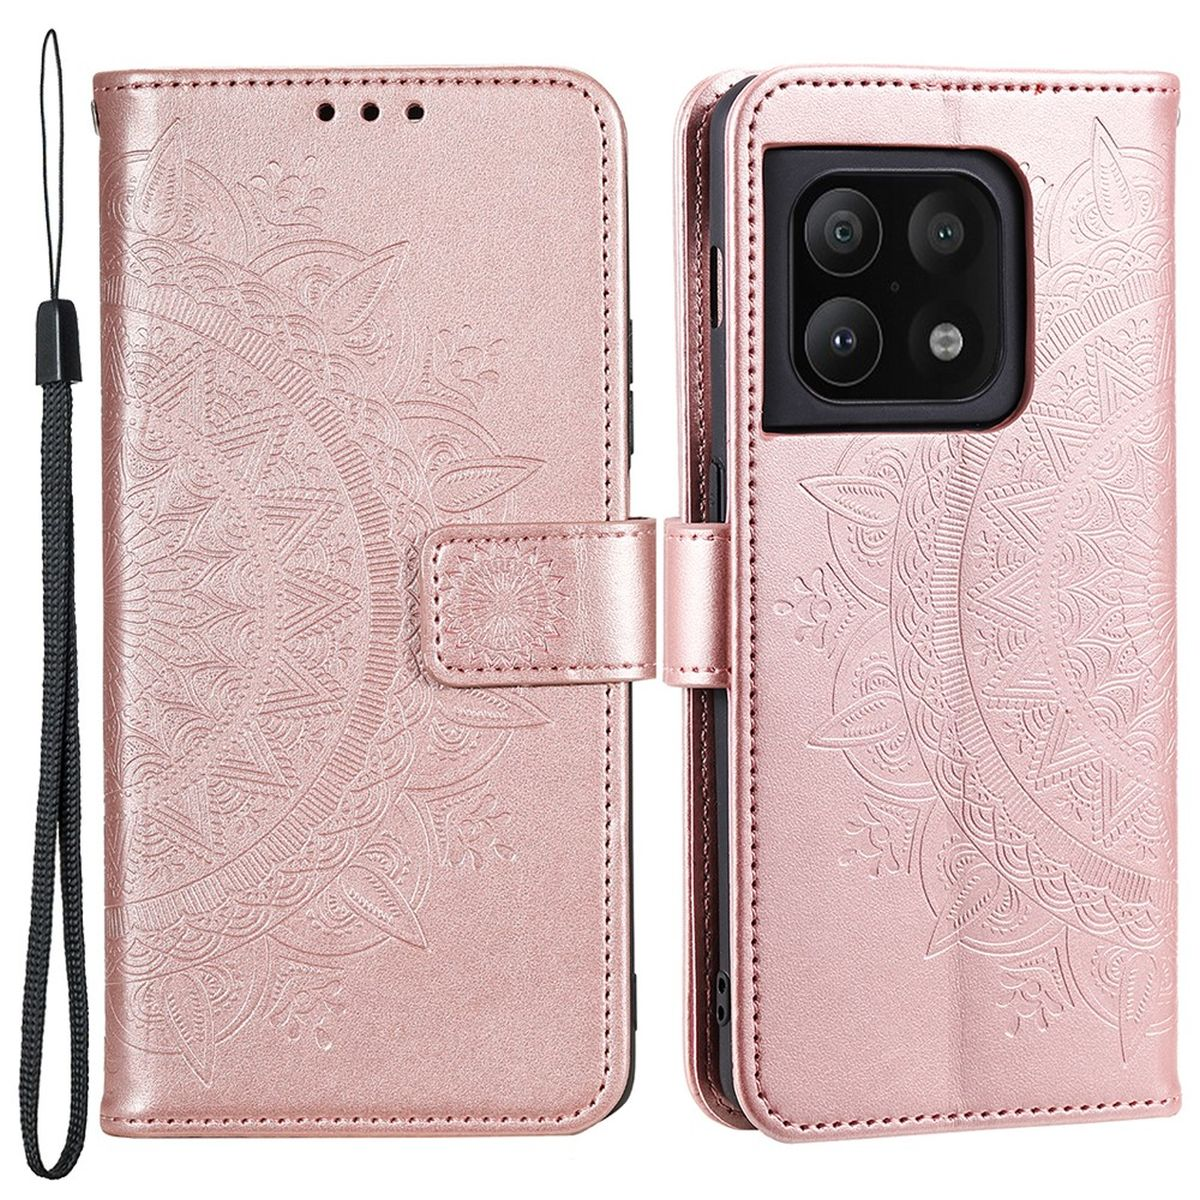 mit Bookcover, 5G, COVERKINGZ Mandala Muster, 10 Pro OnePlus, Rosegold Klapphülle